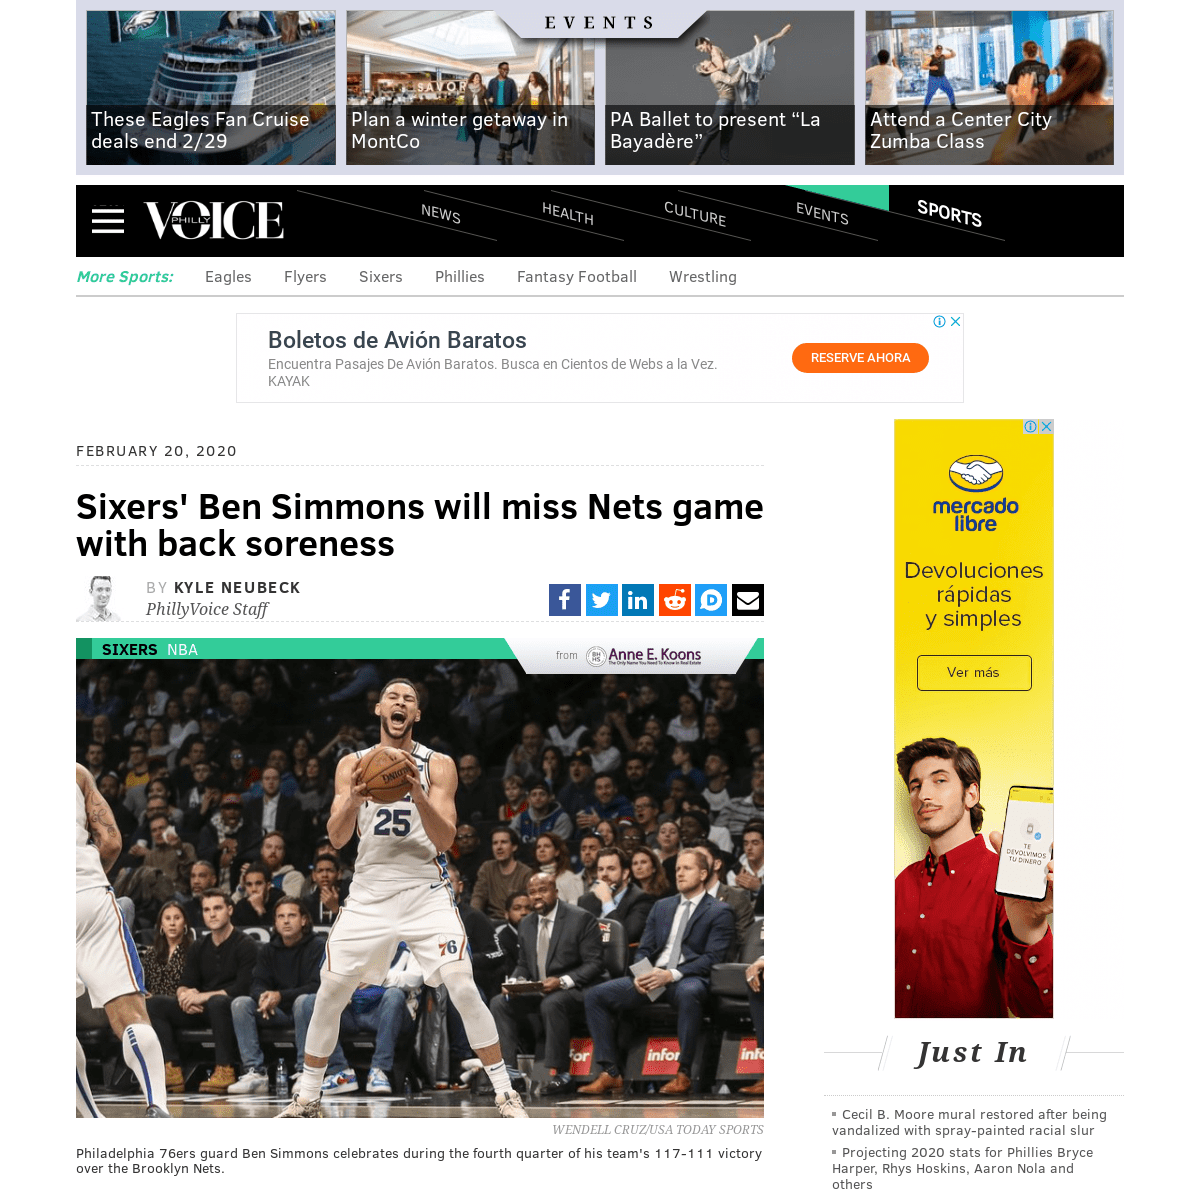 A complete backup of www.phillyvoice.com/sixers-injury-news-ben-simmons-will-miss-nets-game-back-soreness/